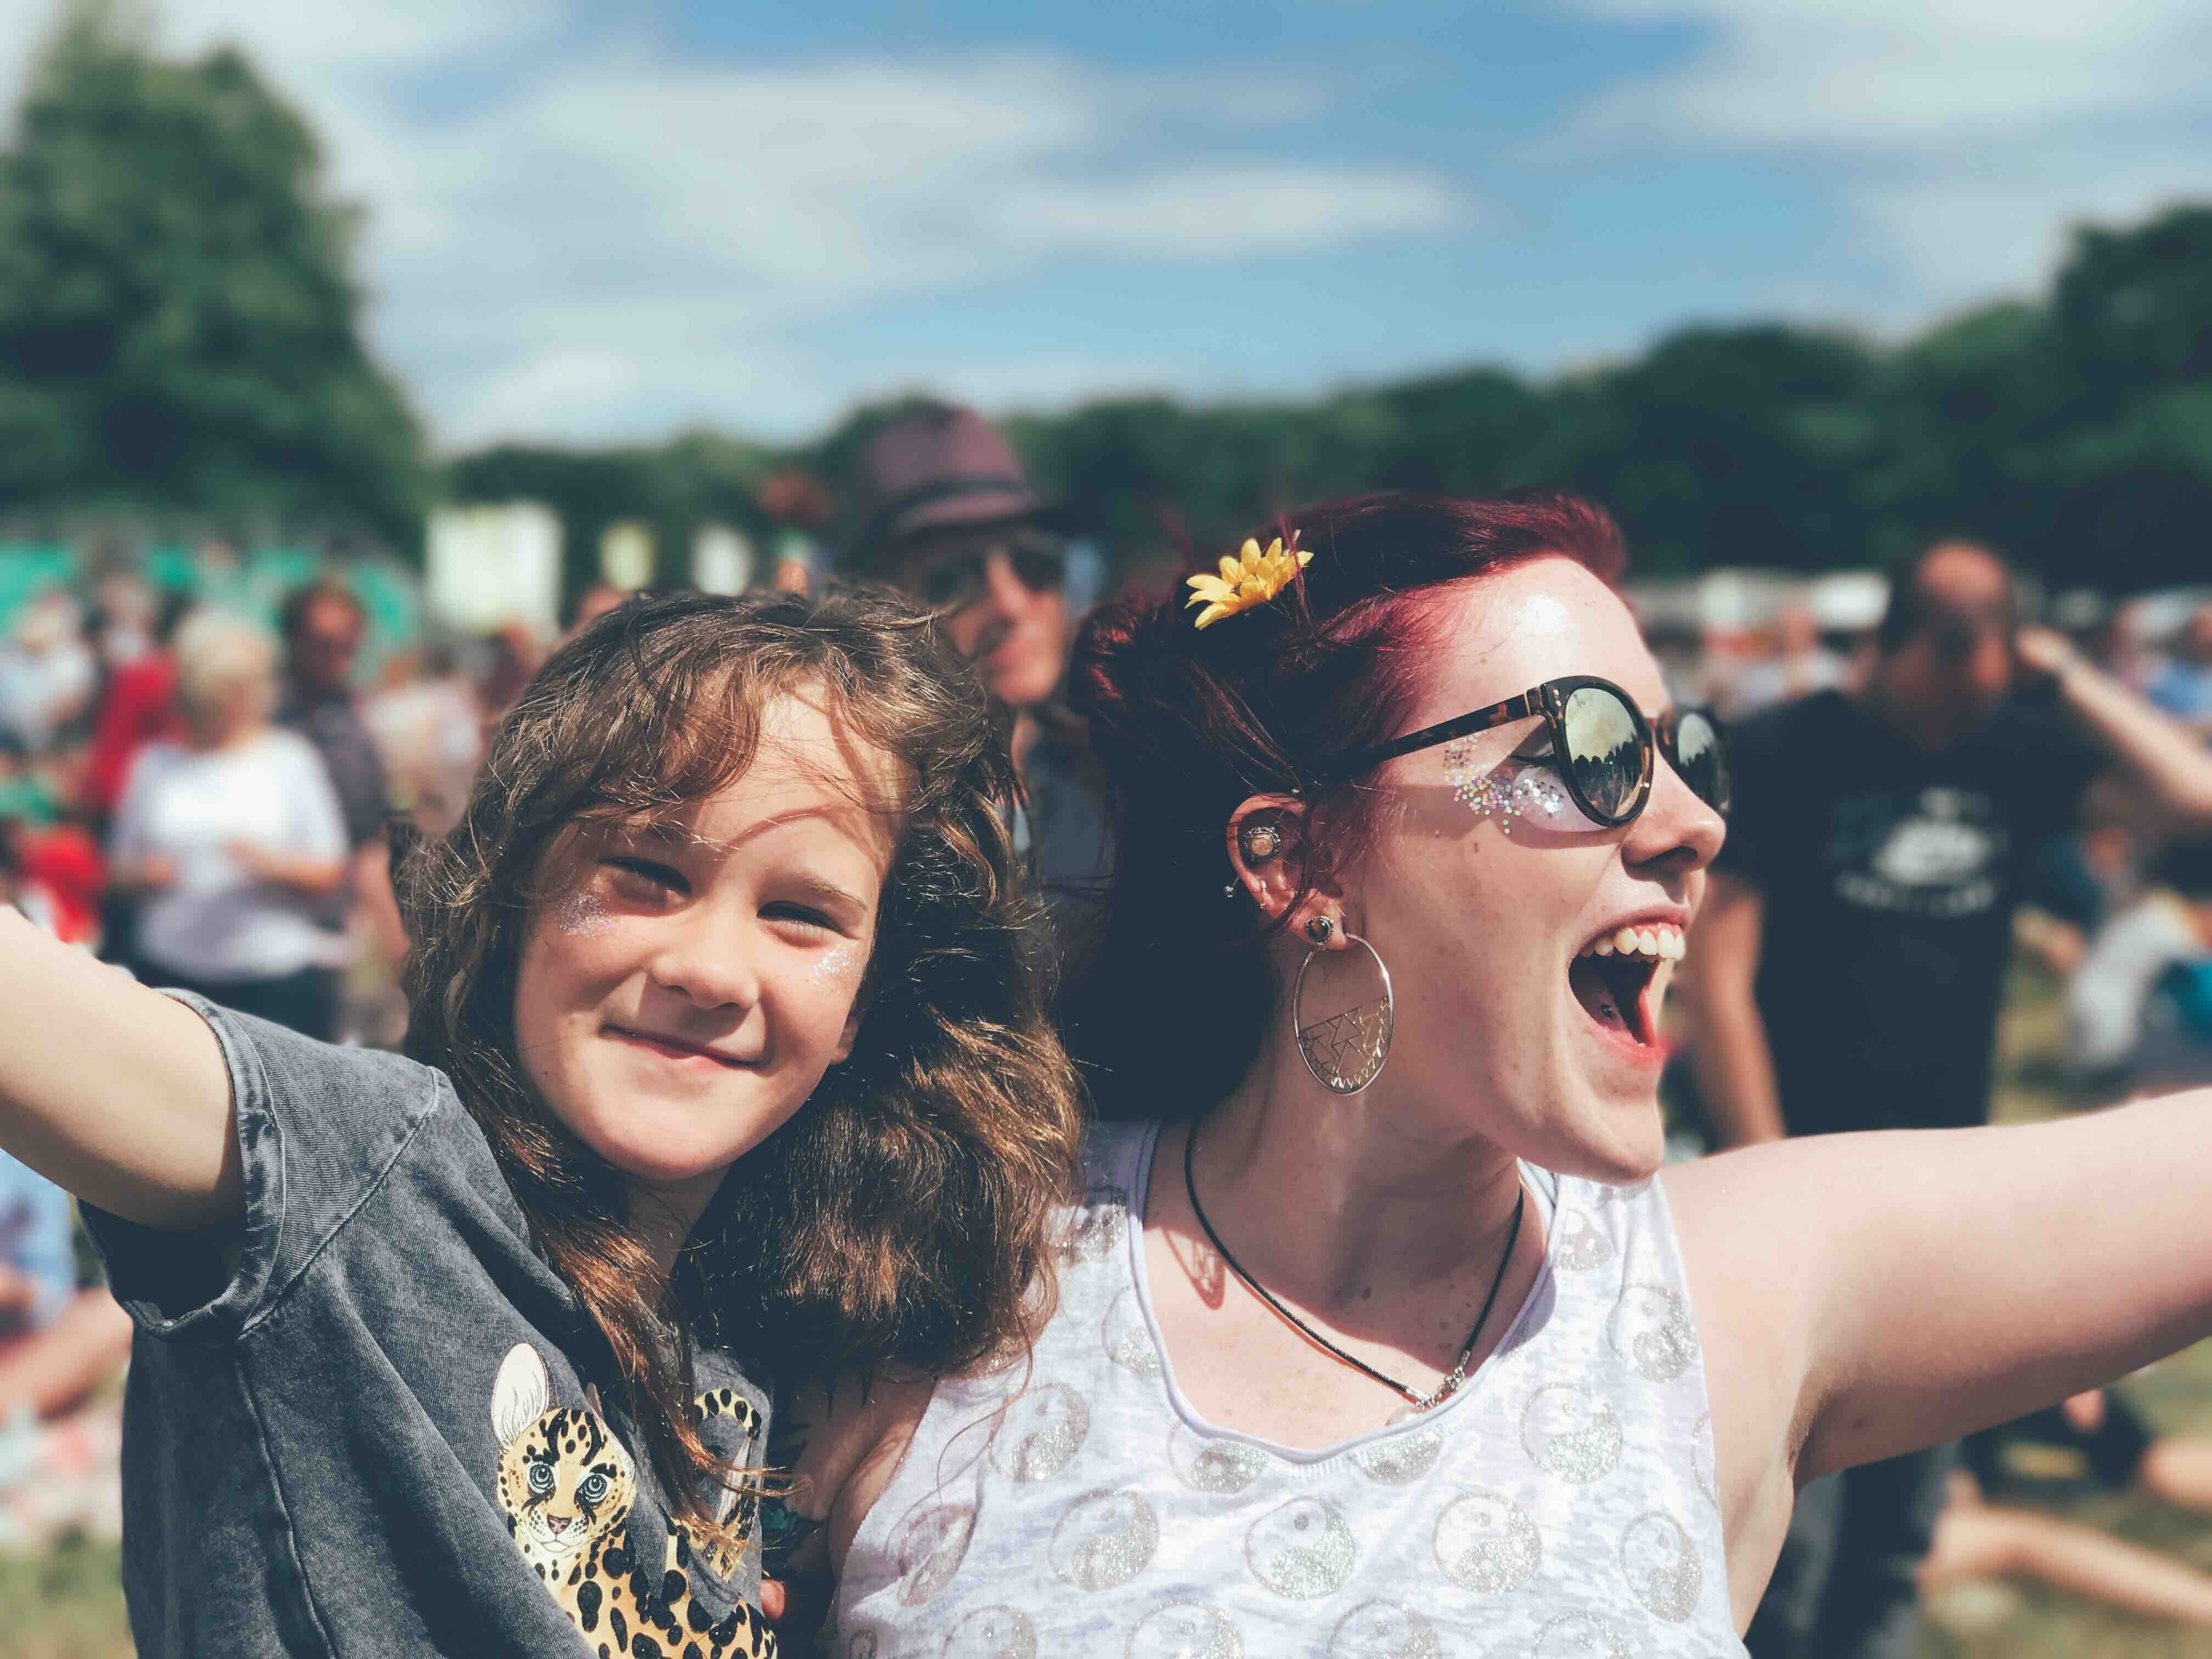 Sisters Having Fun at a Festival - Sibling Photography Ideas